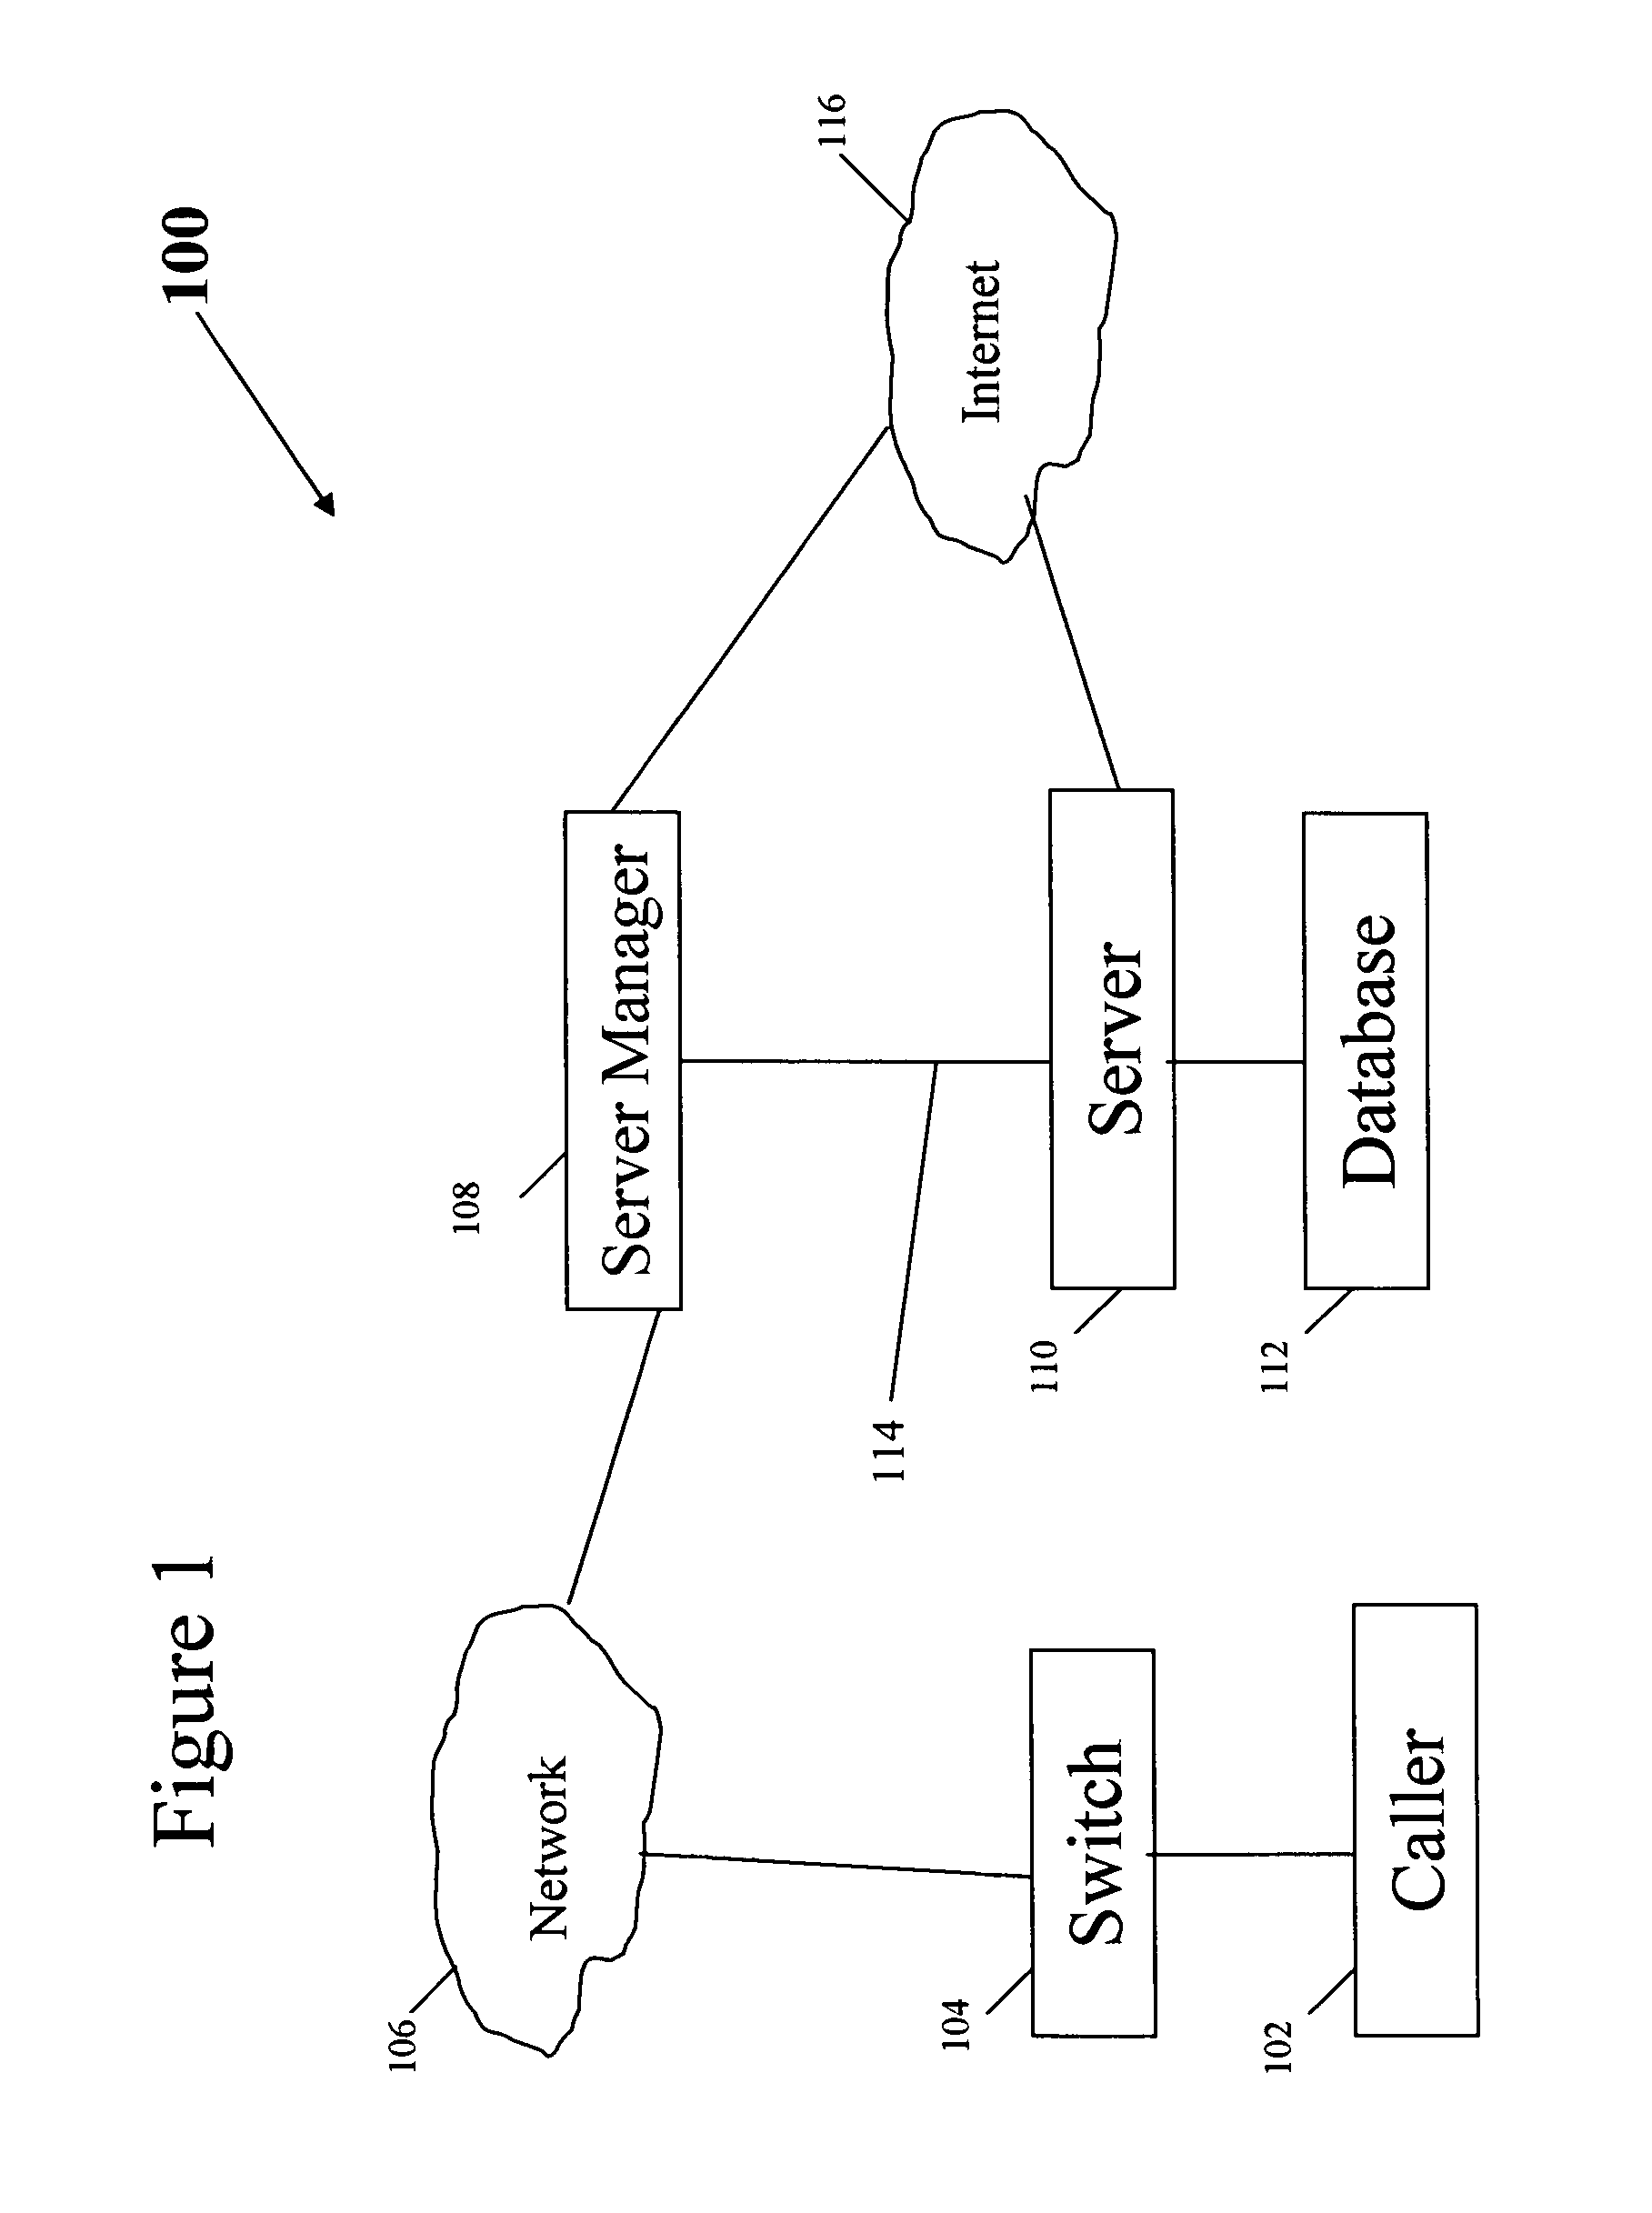 System and method for call tracking